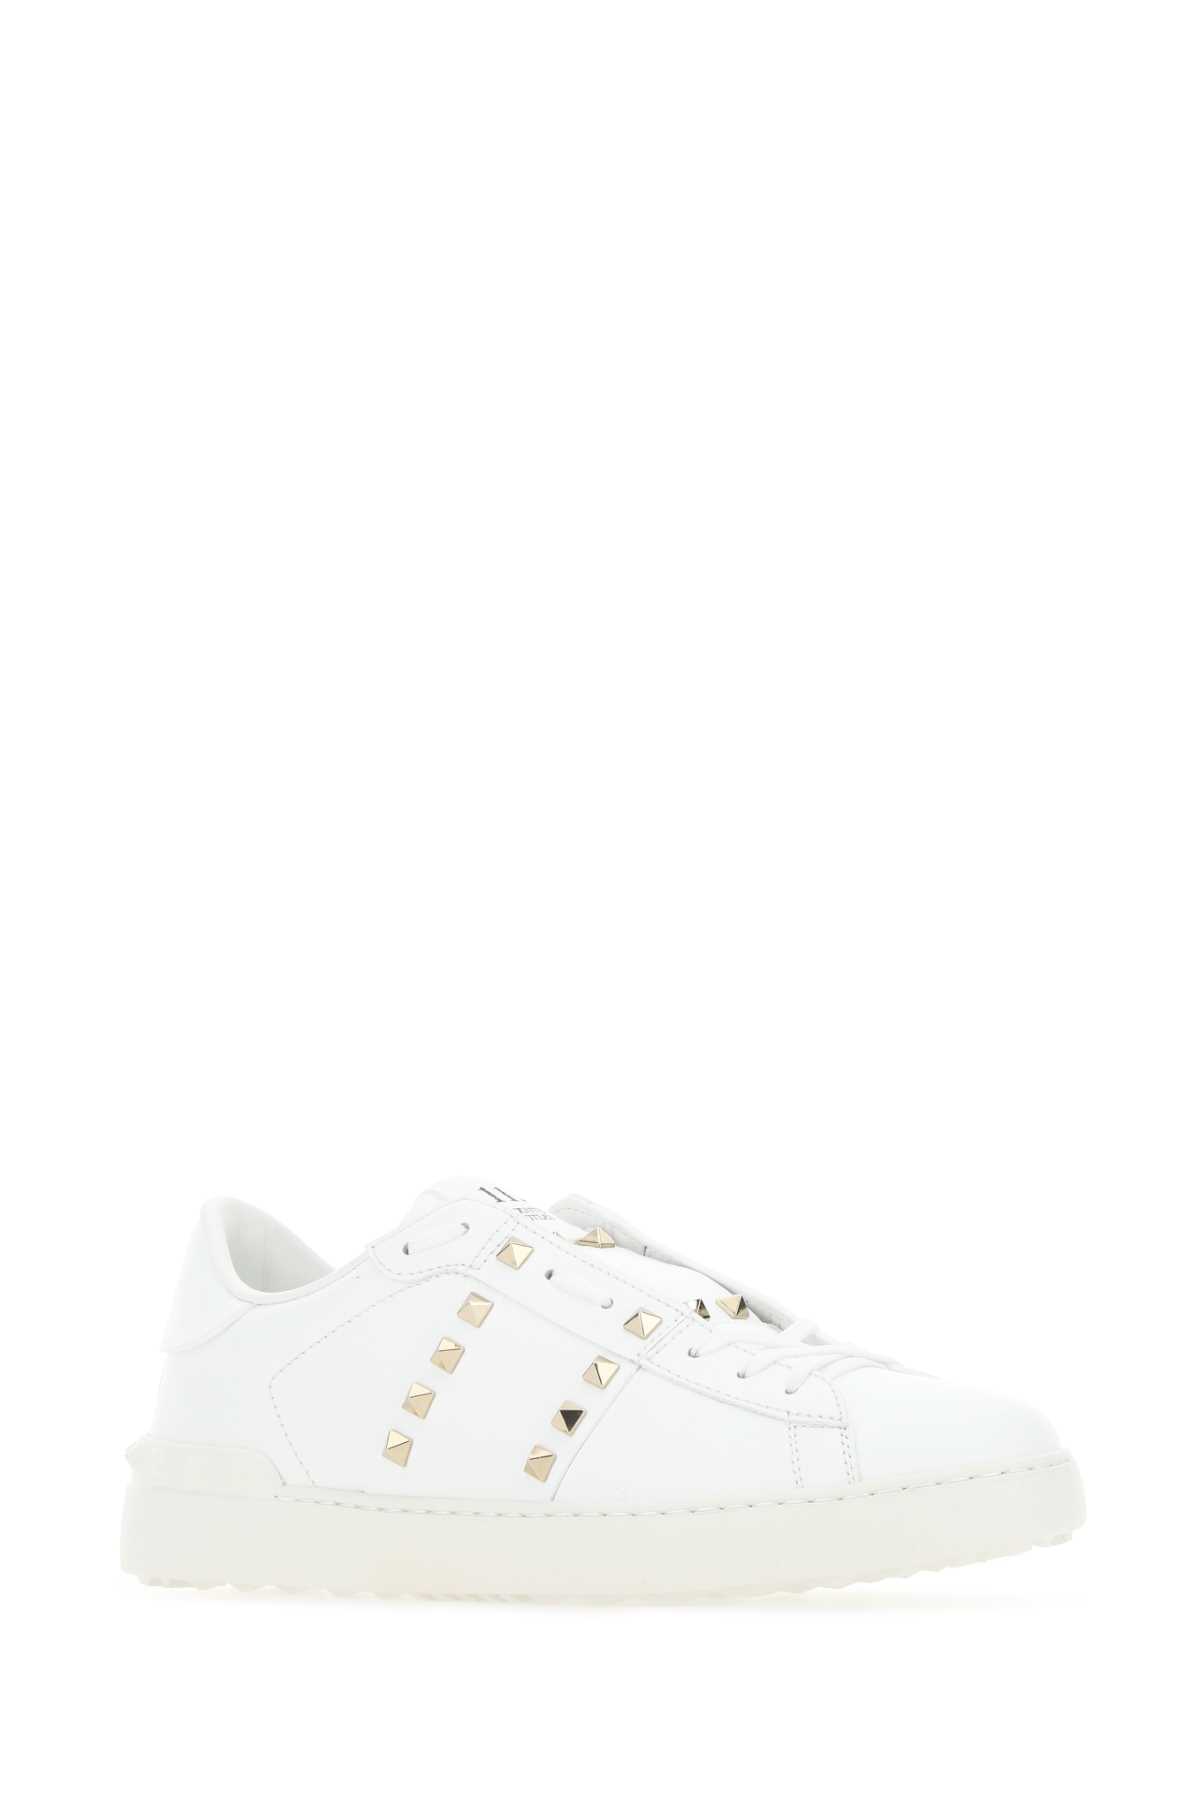 Shop Valentino White Leather Rockstud Untitled Sneakers In Biancobianco